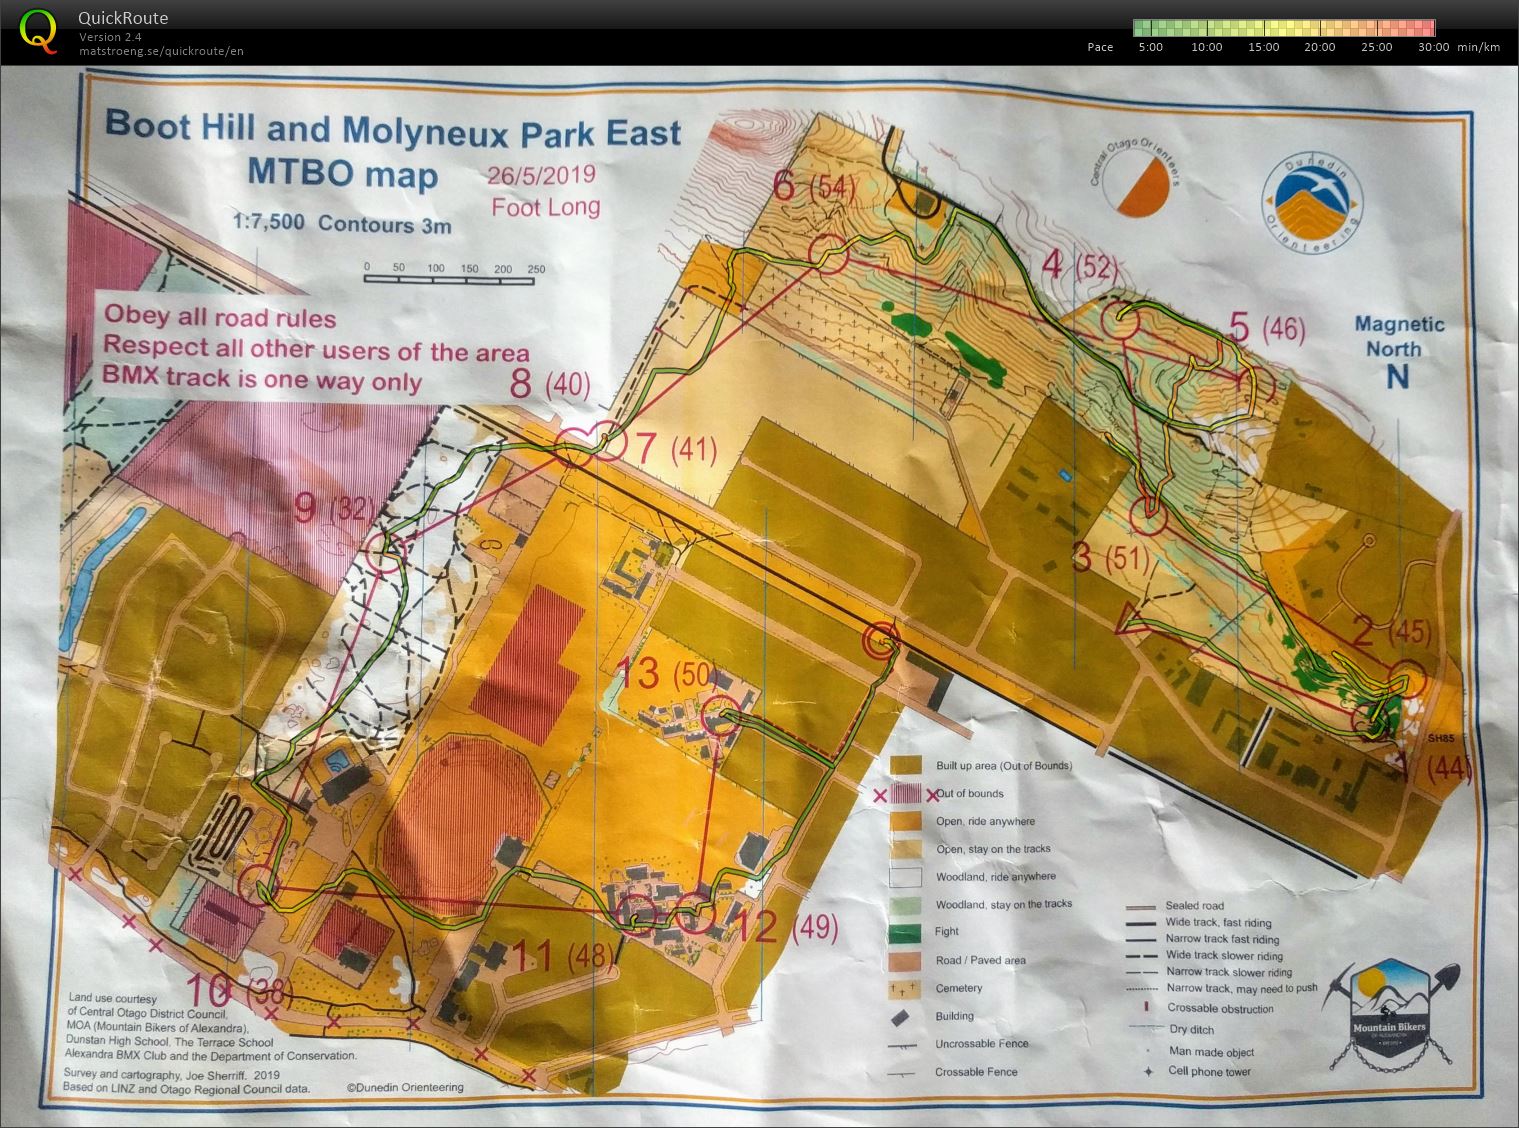 Boot Hill and Molyneux Park East MTBO - Foot Long (26.05.2019)